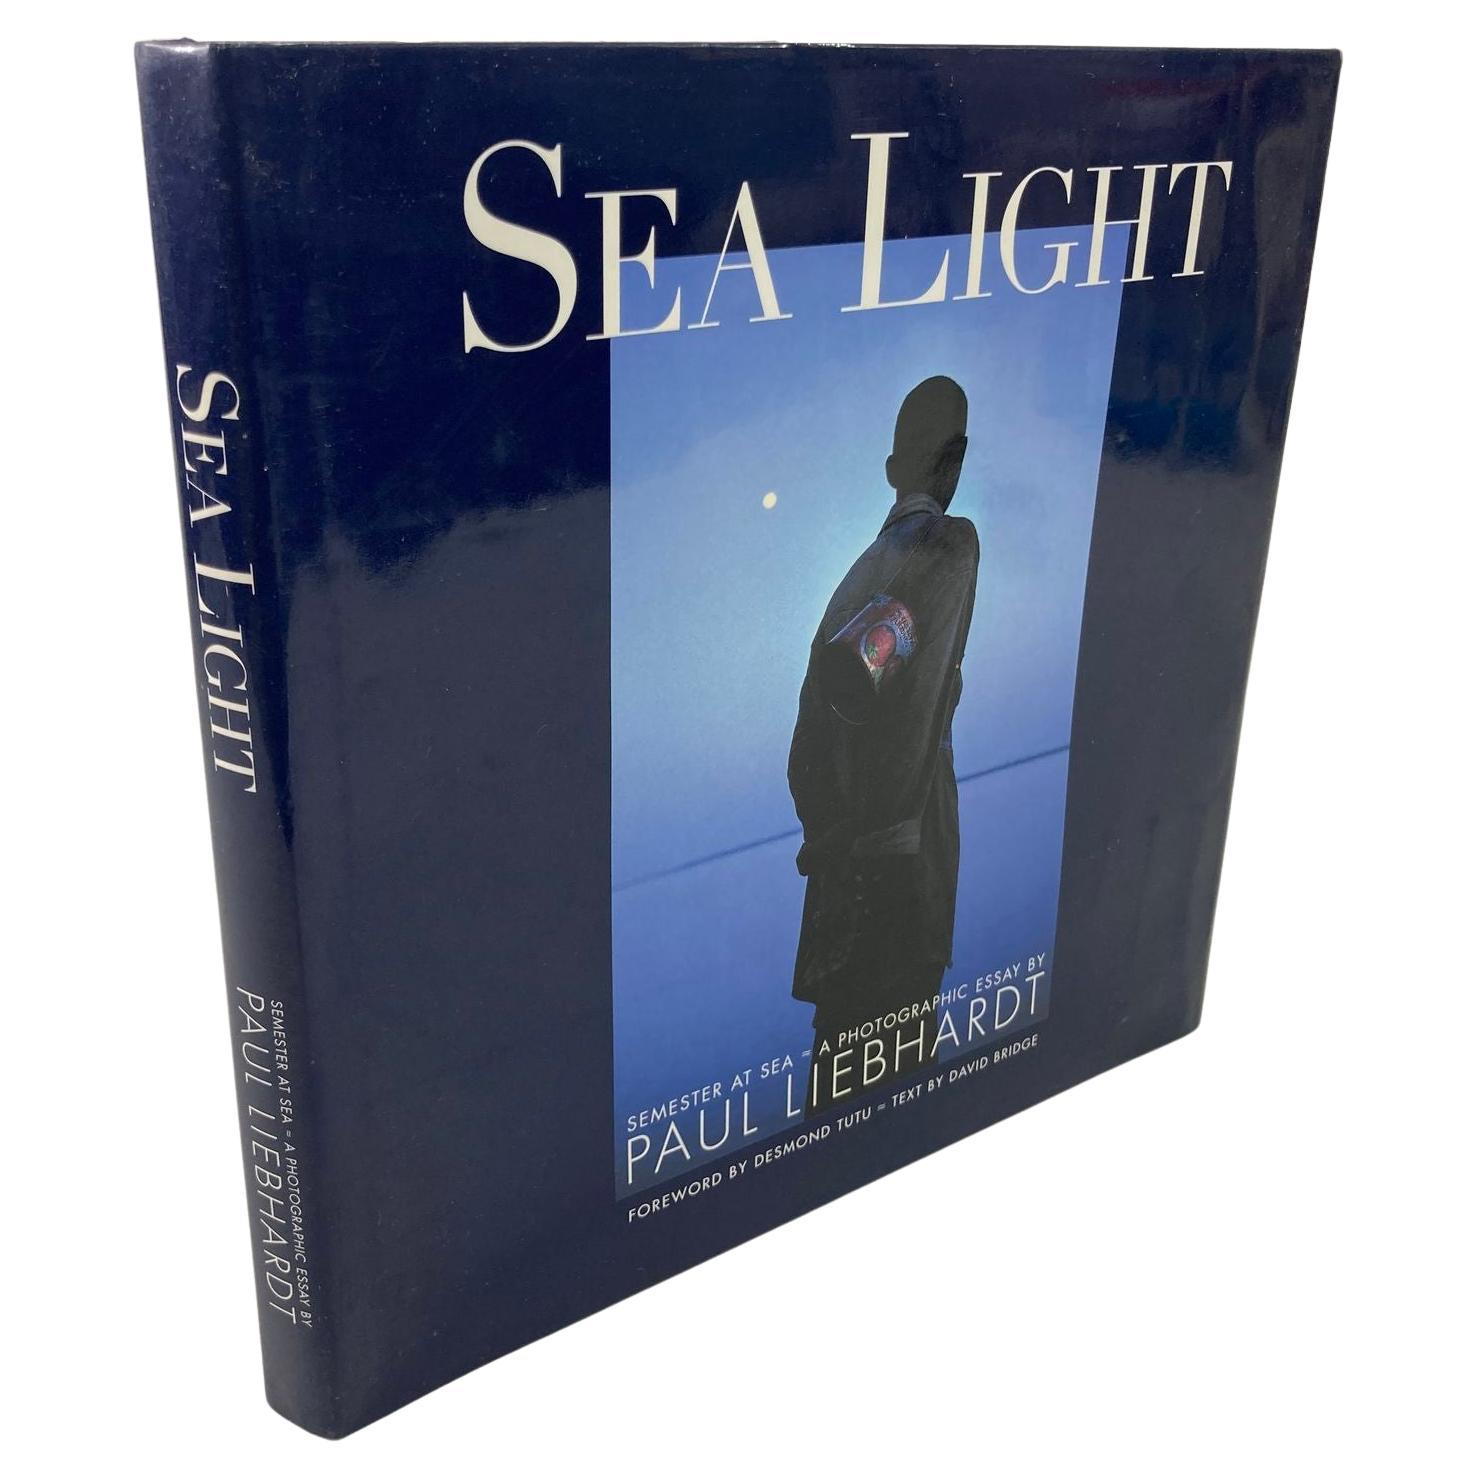 Sea Light by Paul Liebhardt Hardcover Photography Book, 1997 For Sale